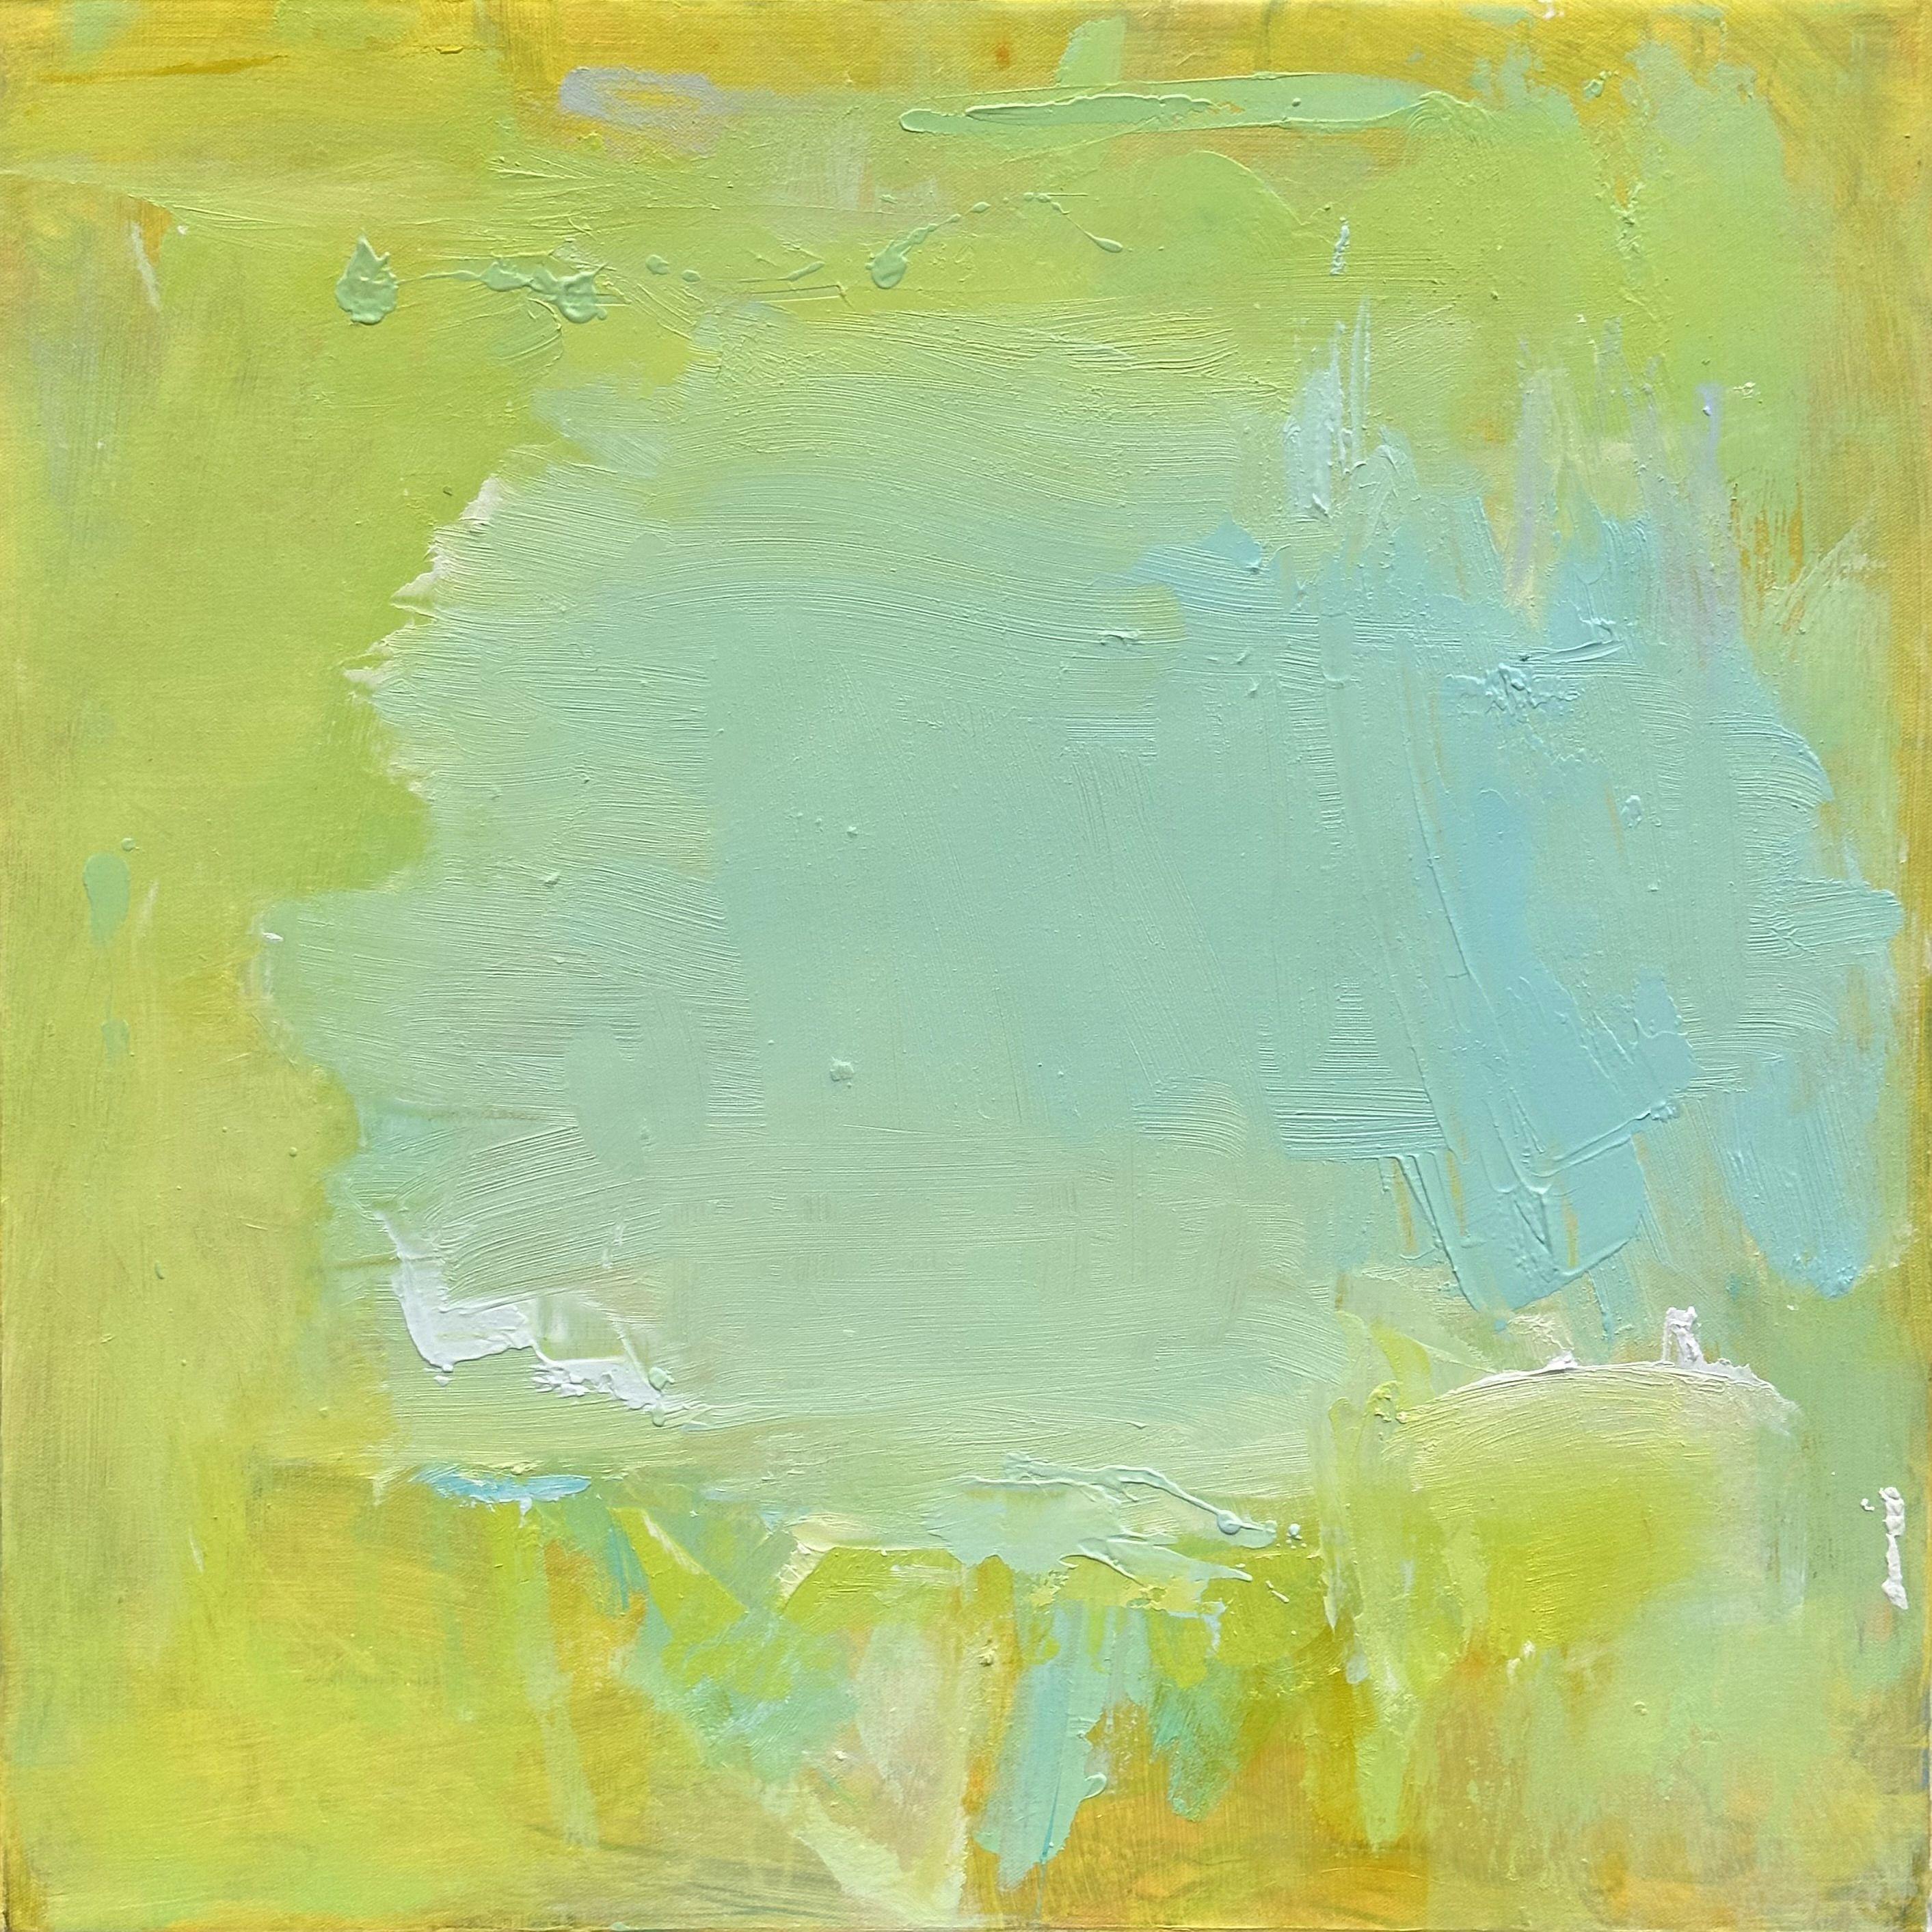 "Spring Palette 2" is an abstract expressionist oil painting on canvas by Trixie Pitts. The palette is delightfully fresh and uplifting and consists of different yellow hues, bright light green, chartreuse, robin's egg turquoise, sky blue and white.